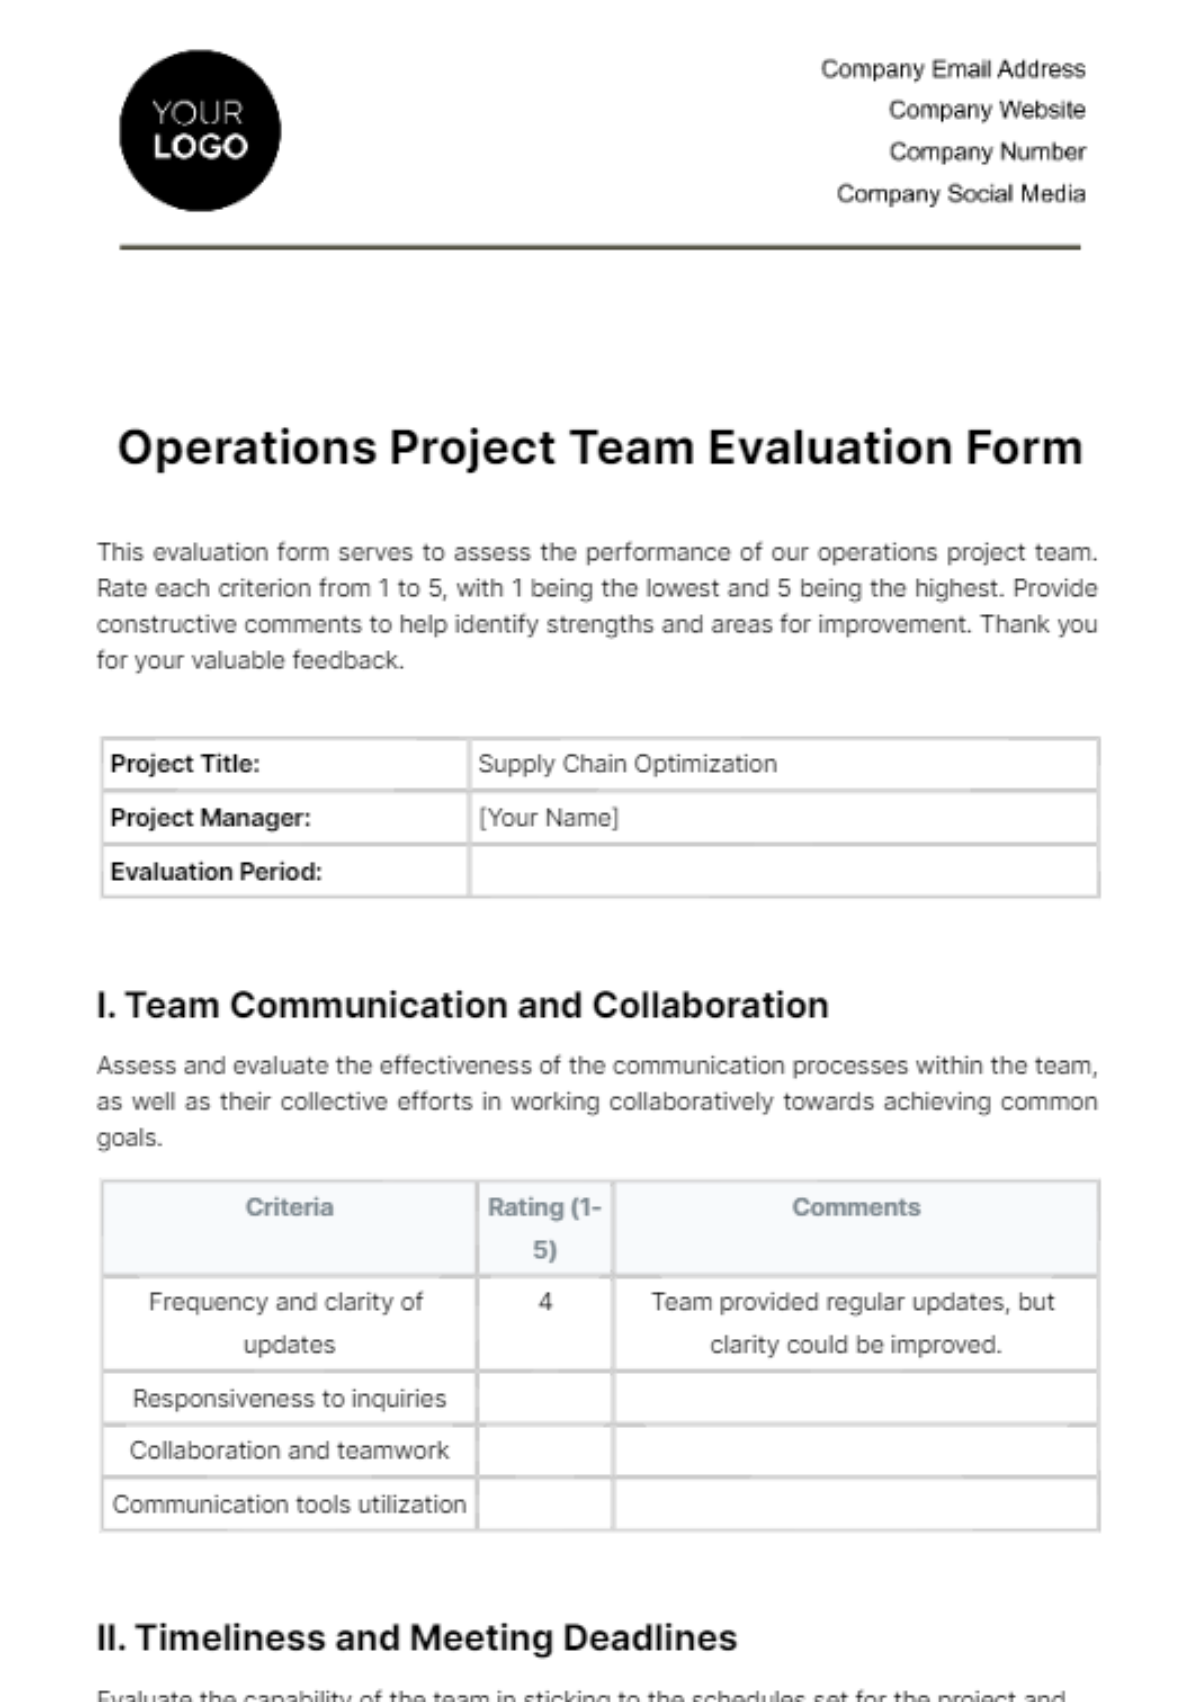 Operations Project Team Evaluation Form Template